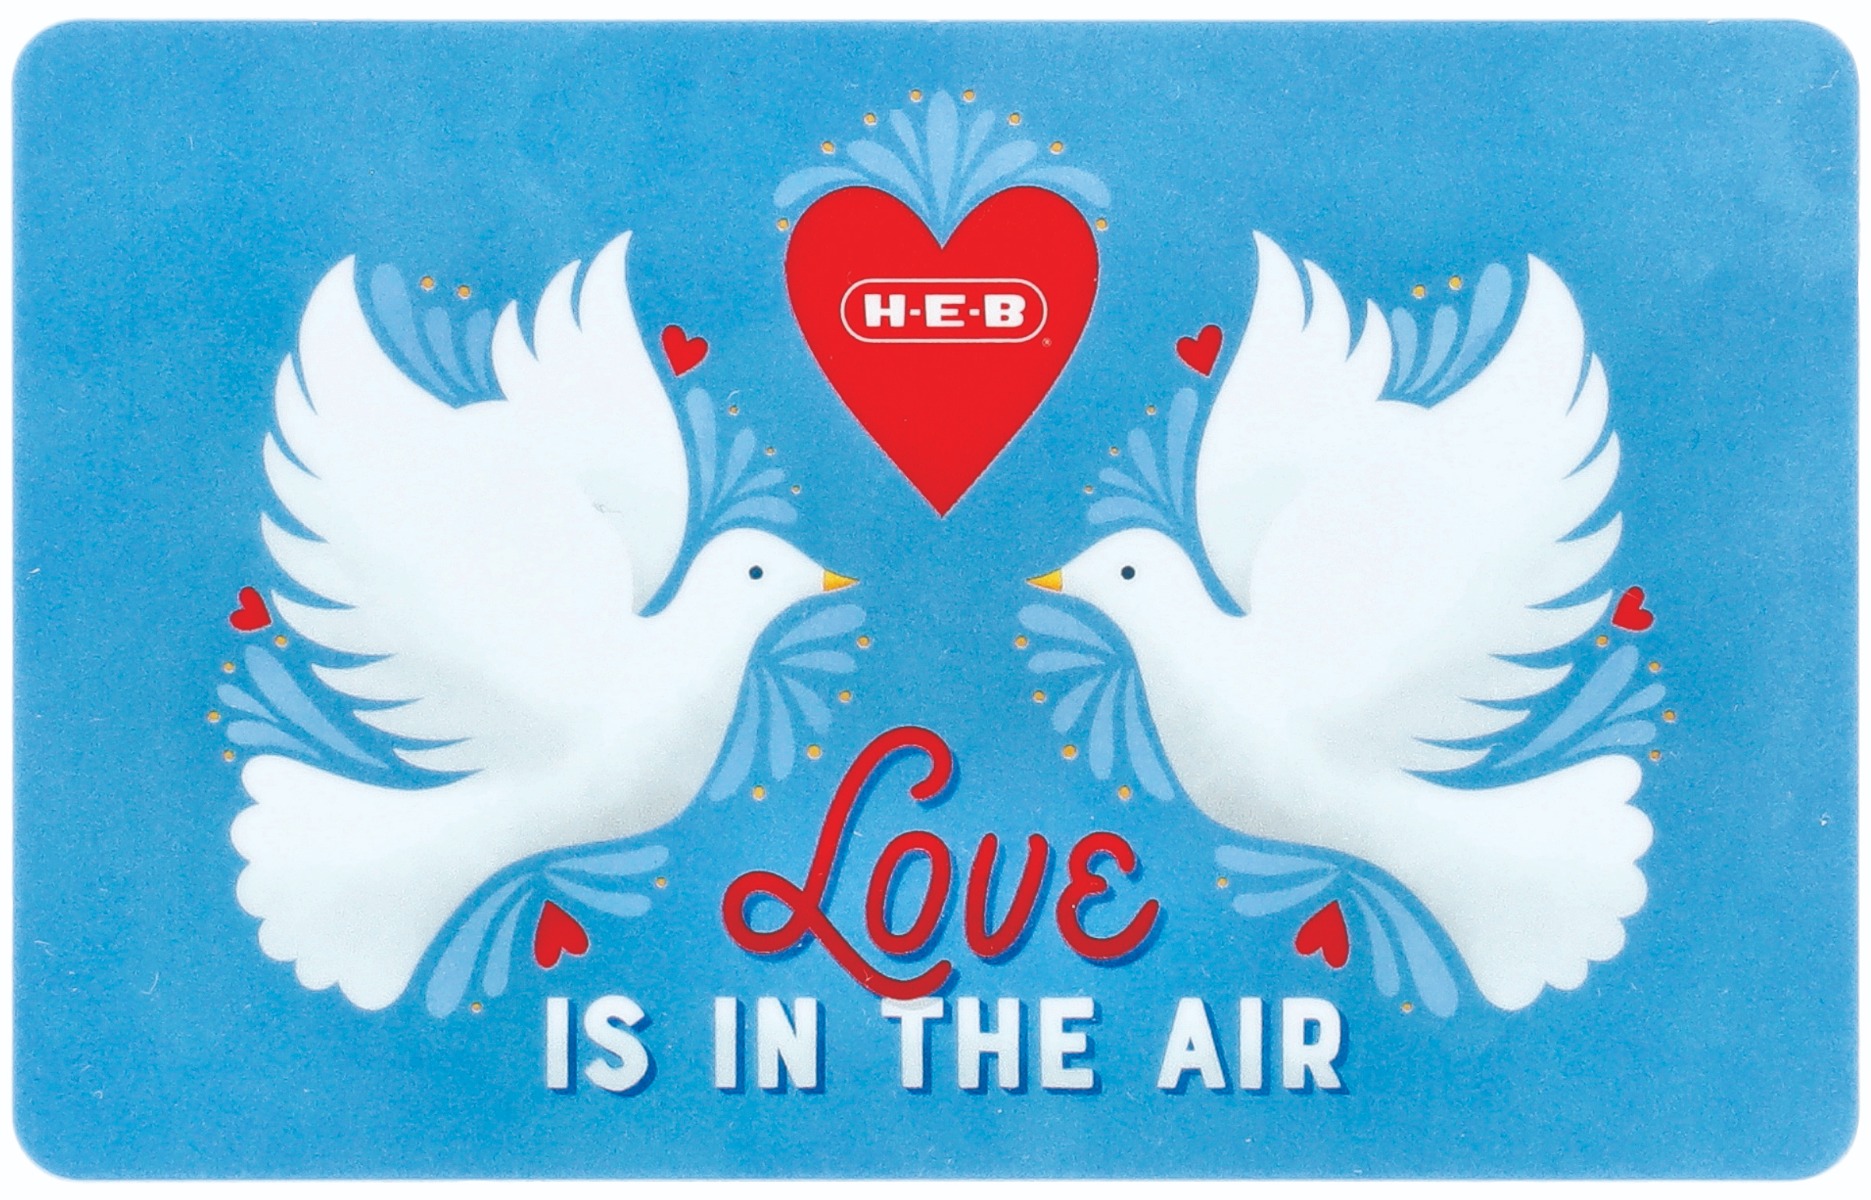 H-E-B Love is in the Air 